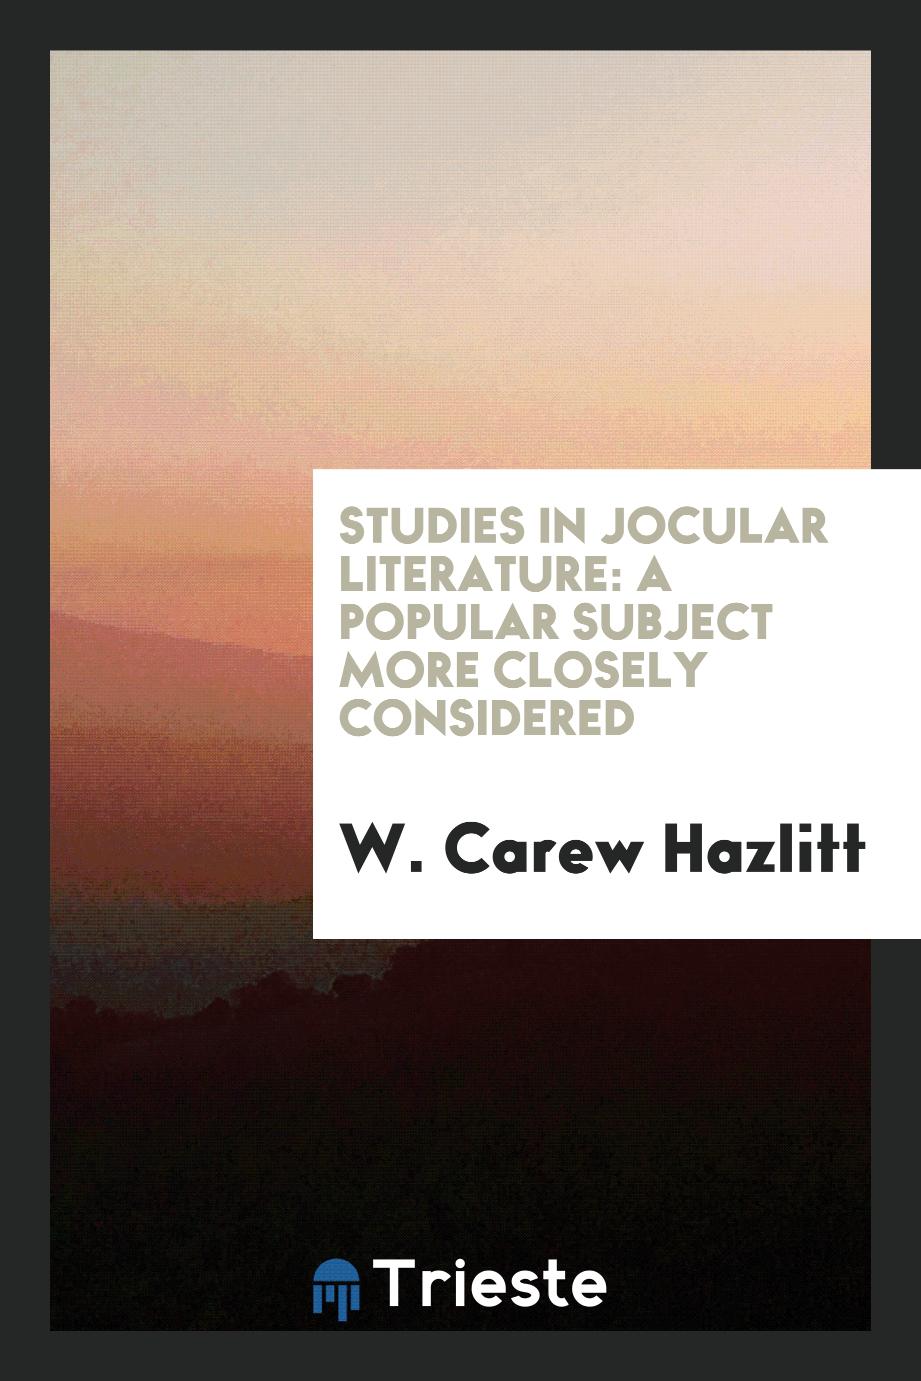 Studies in jocular literature: a popular subject more closely considered